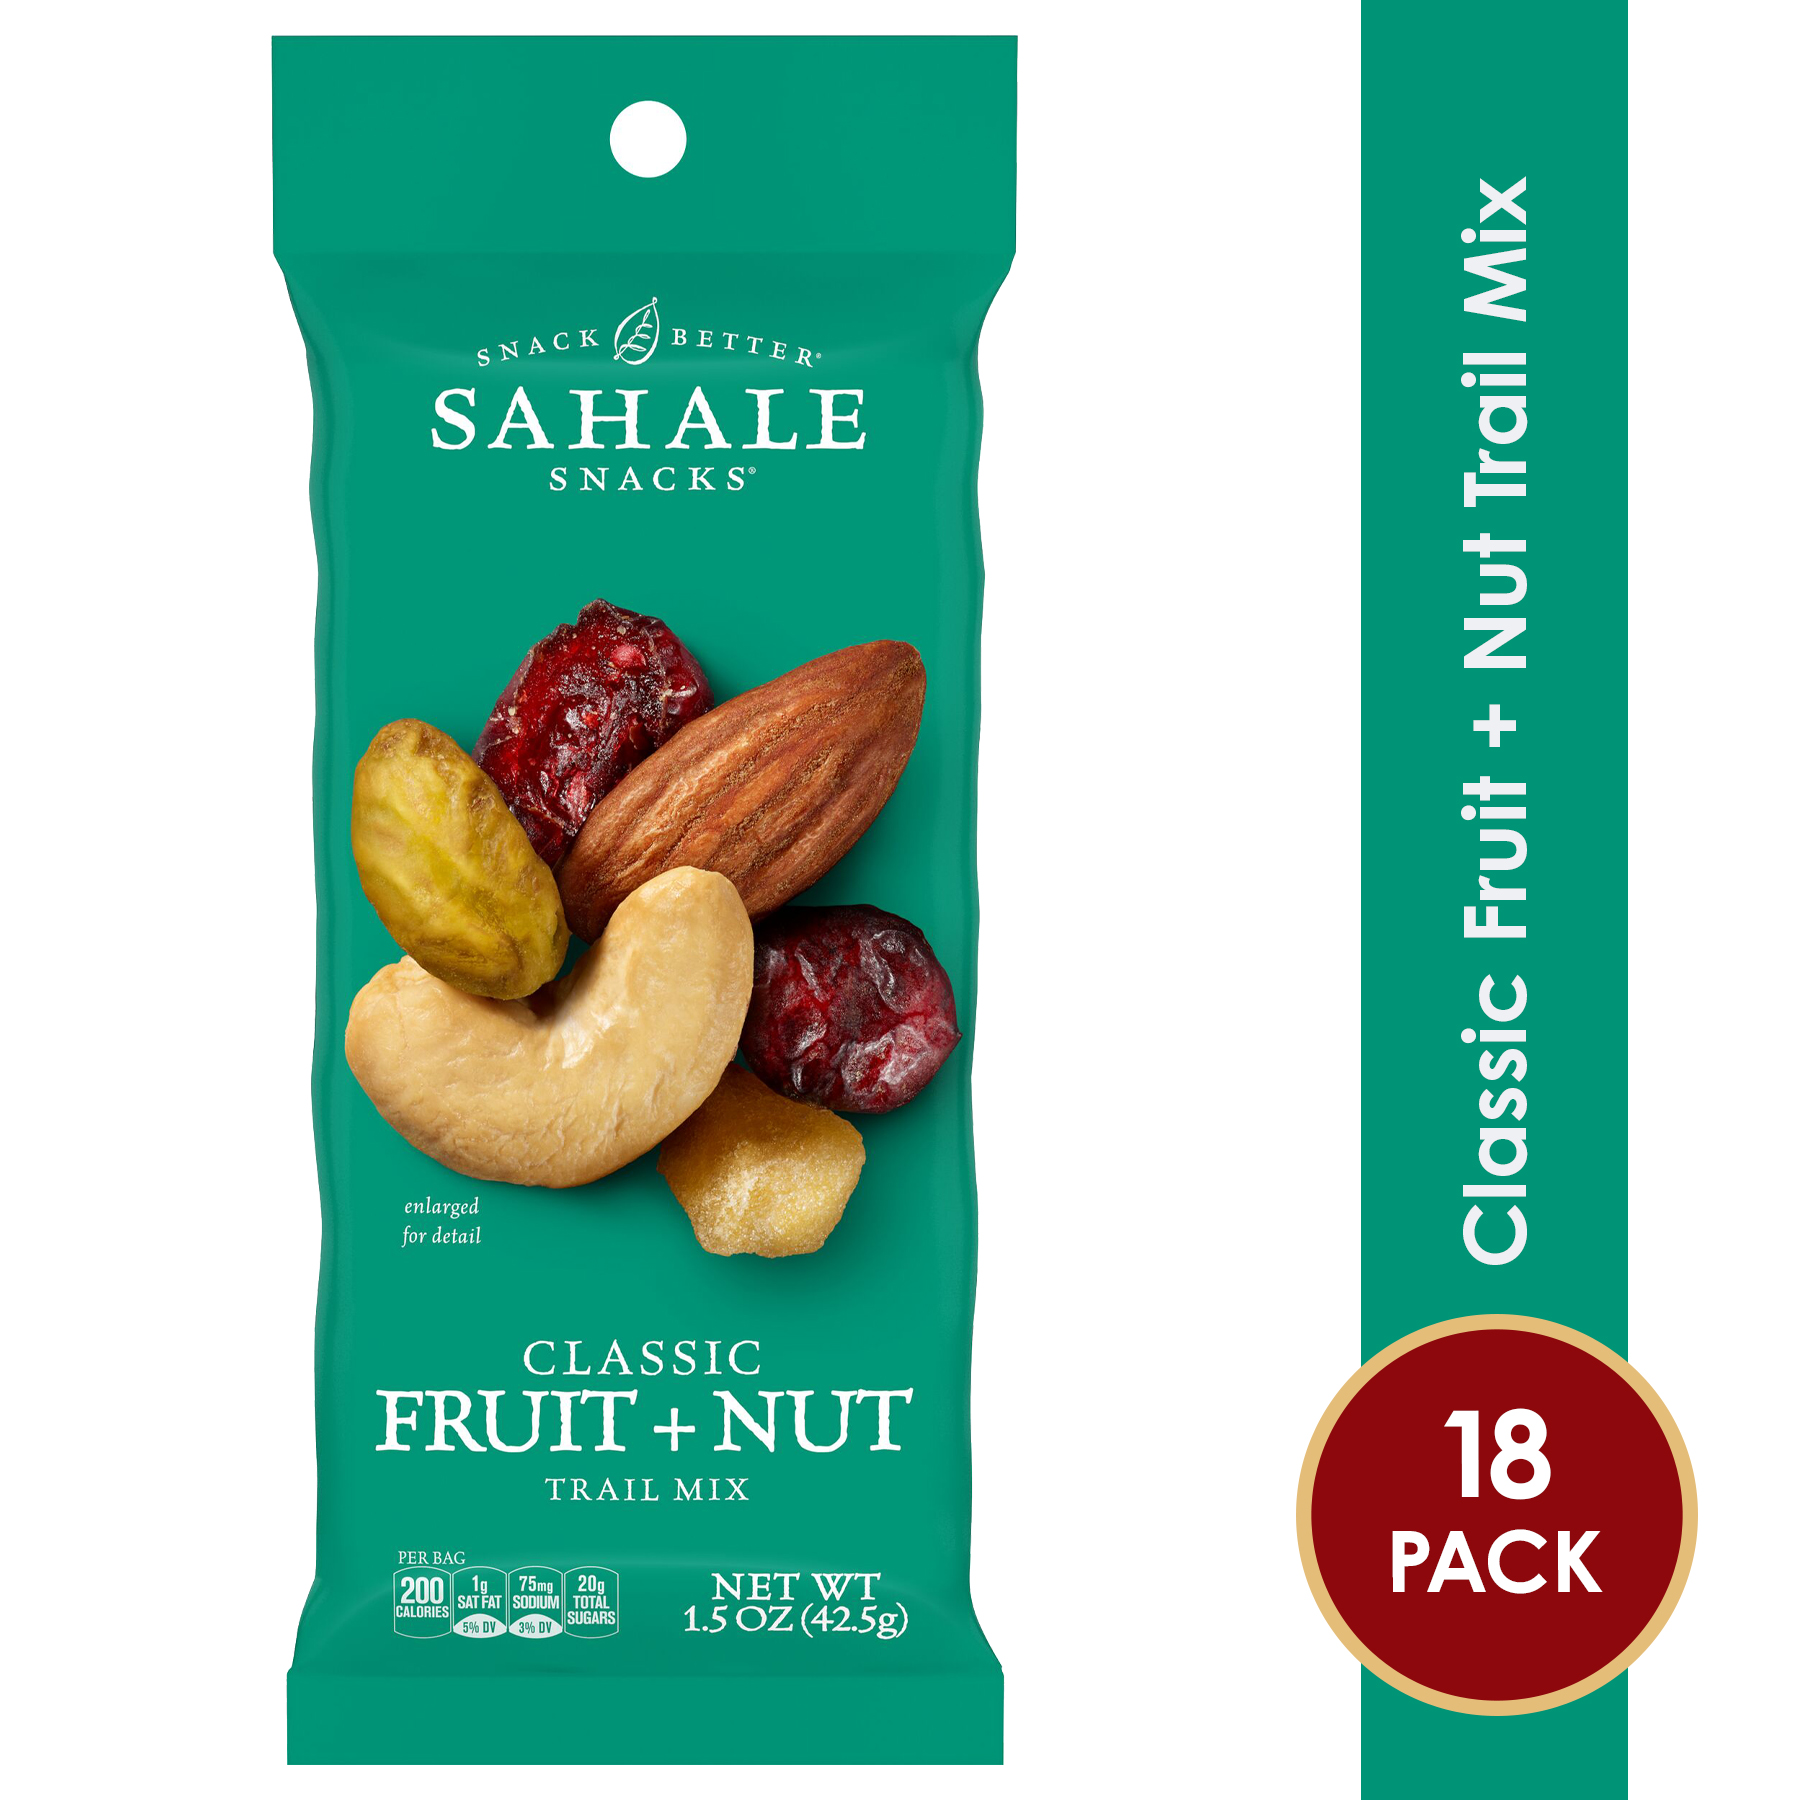 Sahale Snacks Classic Fruit and Nut Trail Mix, 1.5 Ounces (Pack of 18) - image 3 of 6